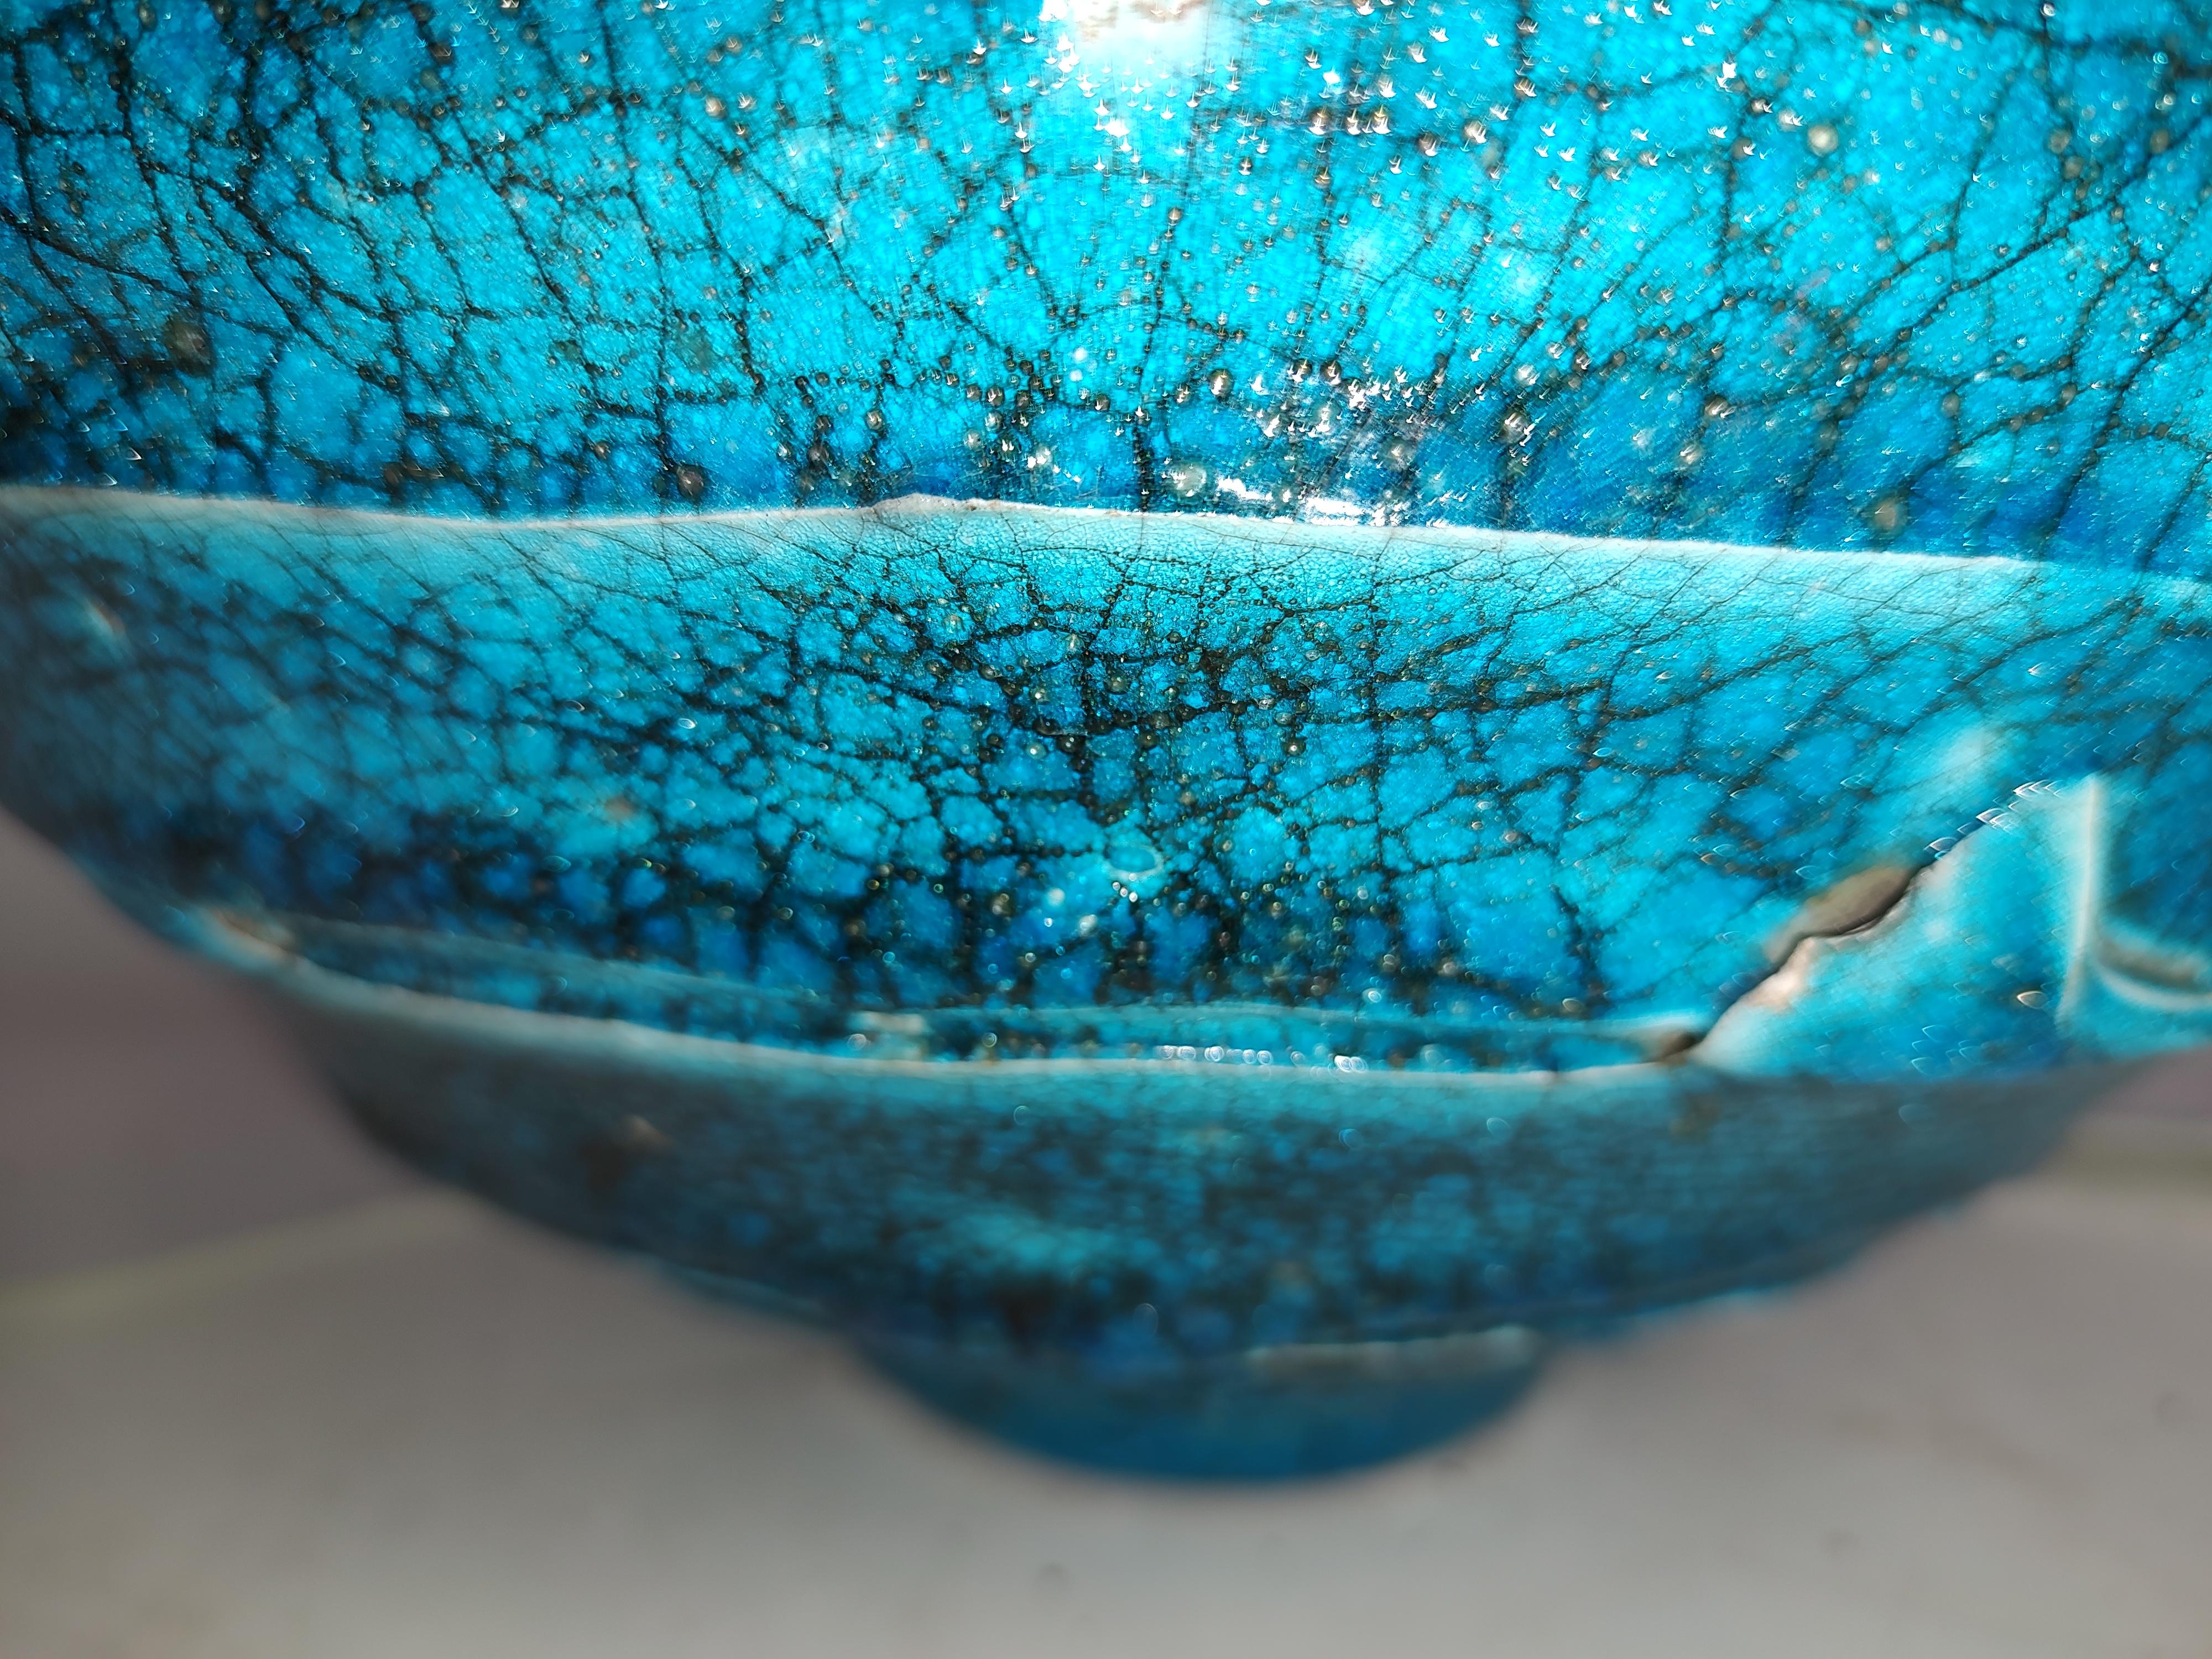 Italian Mid-Century Modern Sculptural Large Art Pottery Bowl in Turquoise Blue For Sale